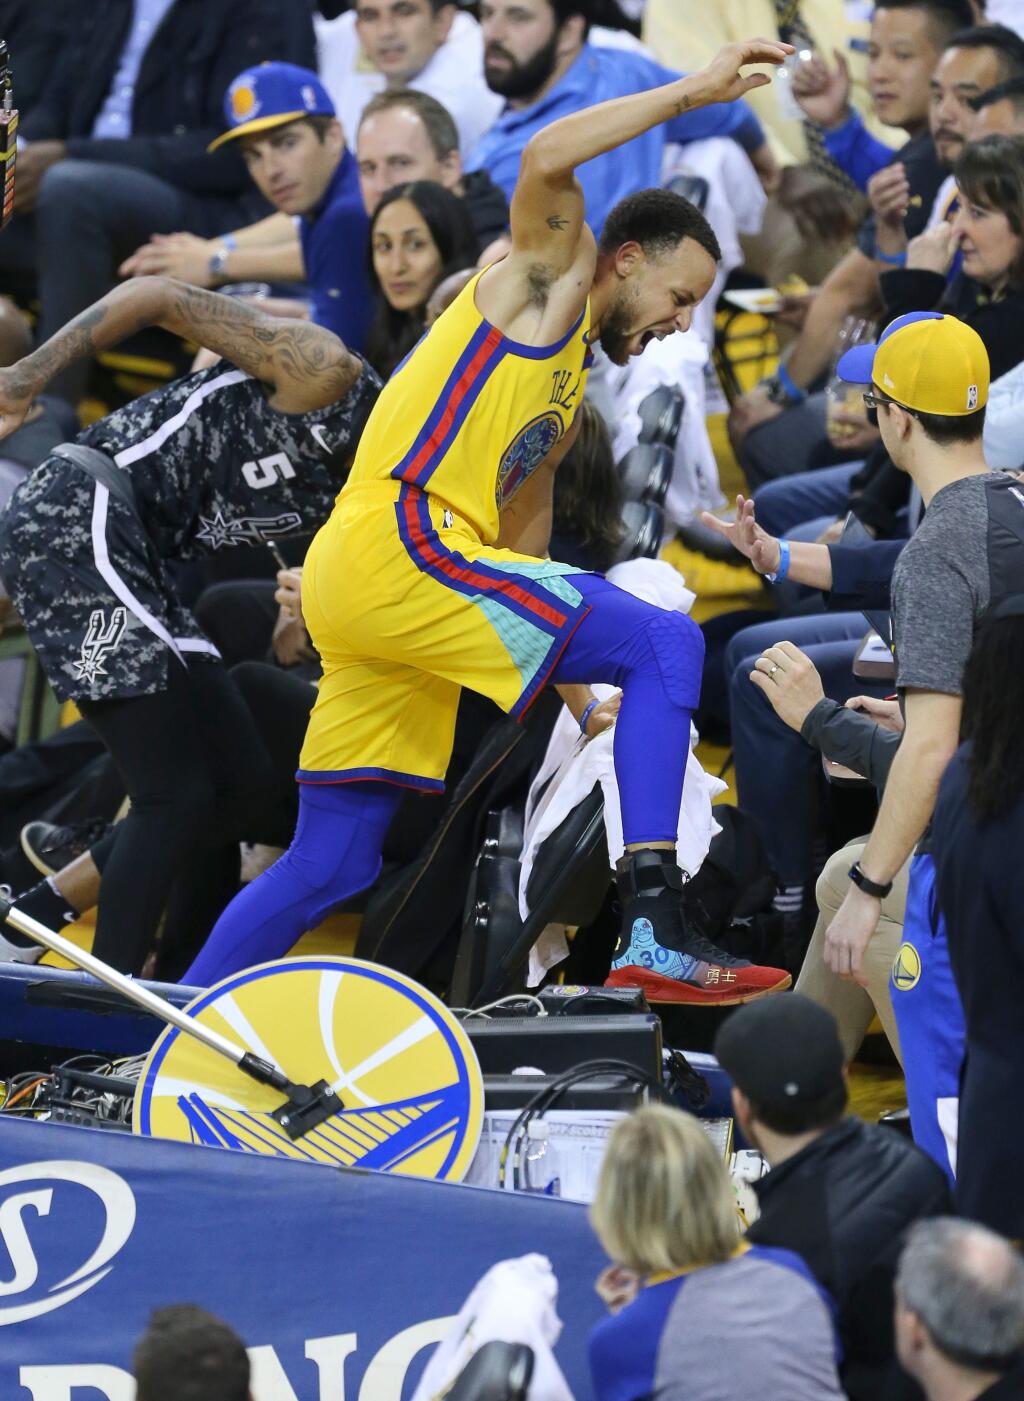 Golden State Warriors guard Stephen Curry winces in pain as he stumbles off the court on a play involving San Antonio Spurs' Dejounte Murray during their game in Oakland on Thursday, March 8, 2018. (Christopher Chung / The Press Democrat)